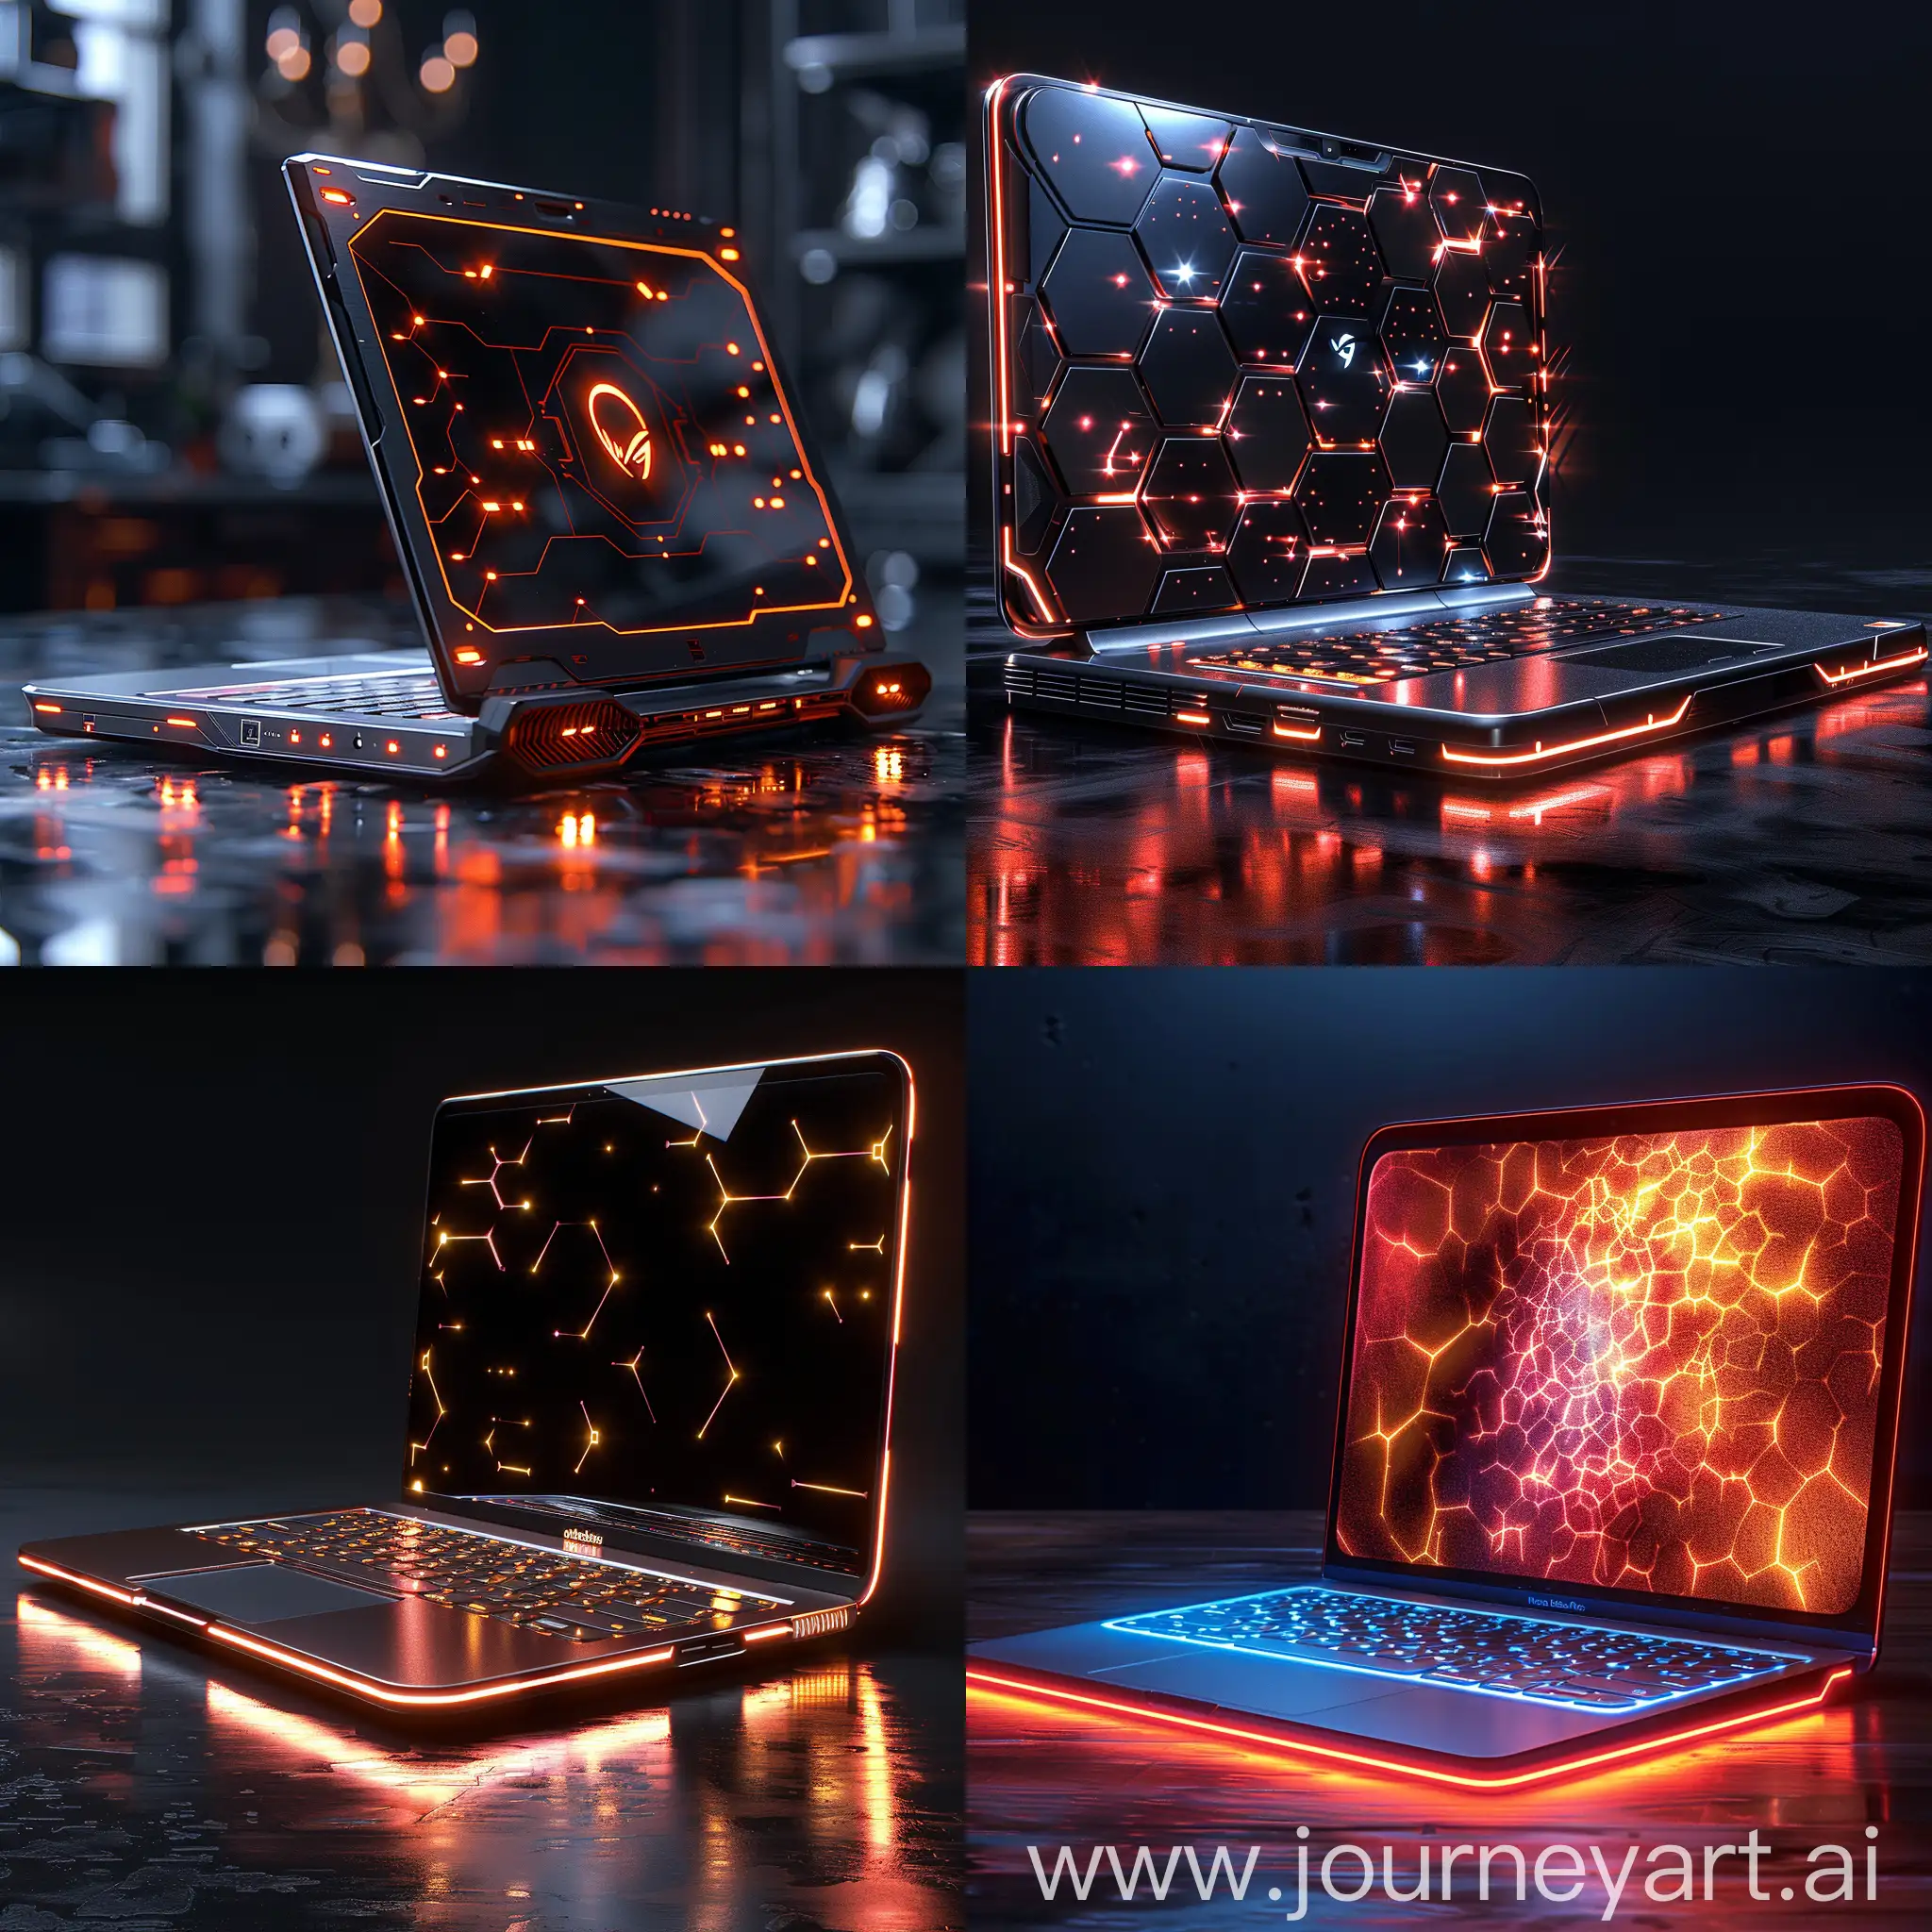 Futuristic-UltraModern-Laptop-with-Smart-Materials-and-HighTech-Design